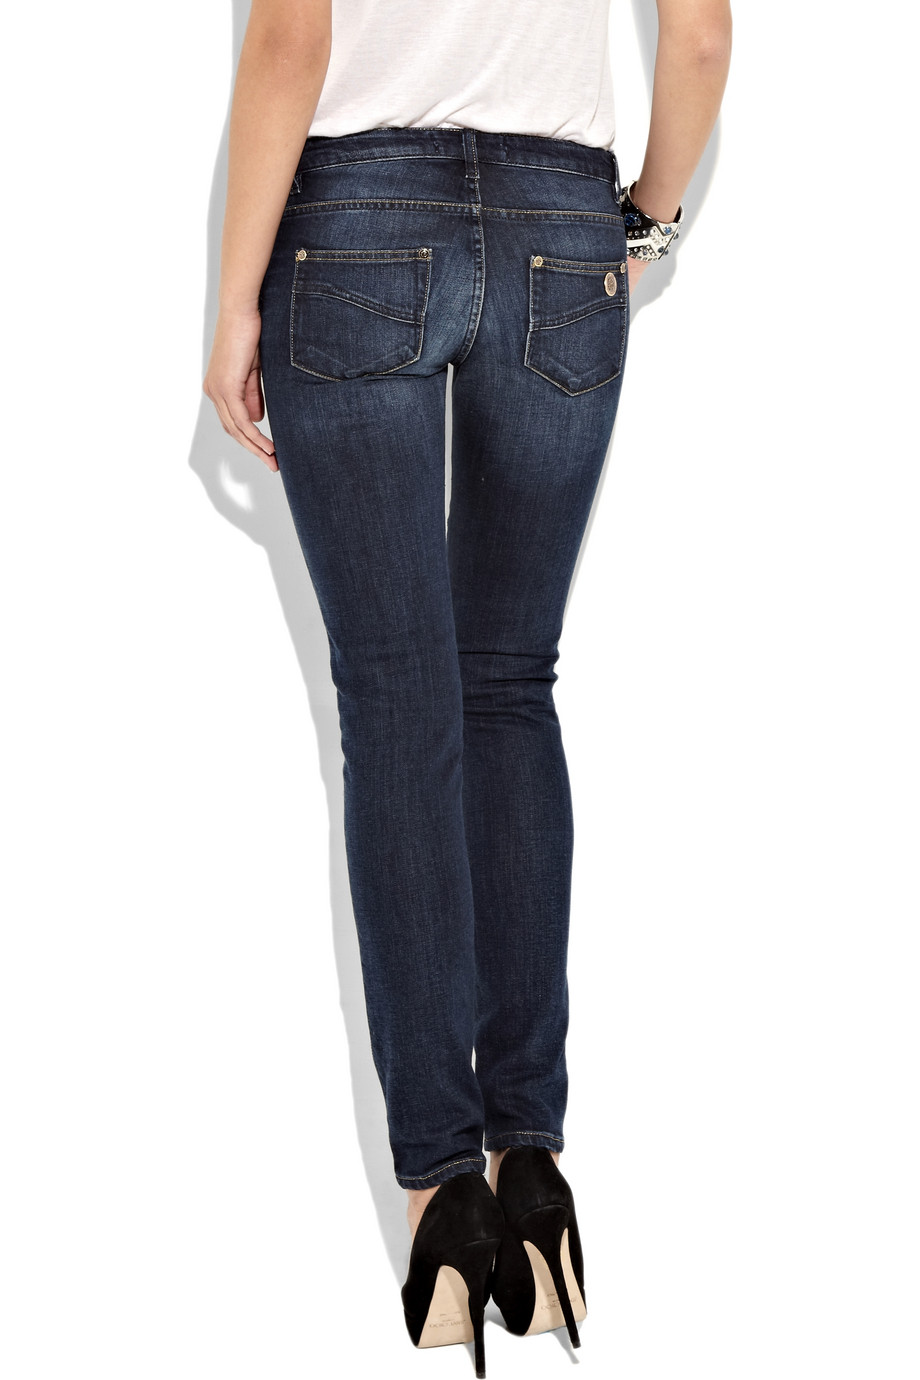 Lyst - Roberto Cavalli Sequin-embellished Mid-rise Skinny Jeans in Blue